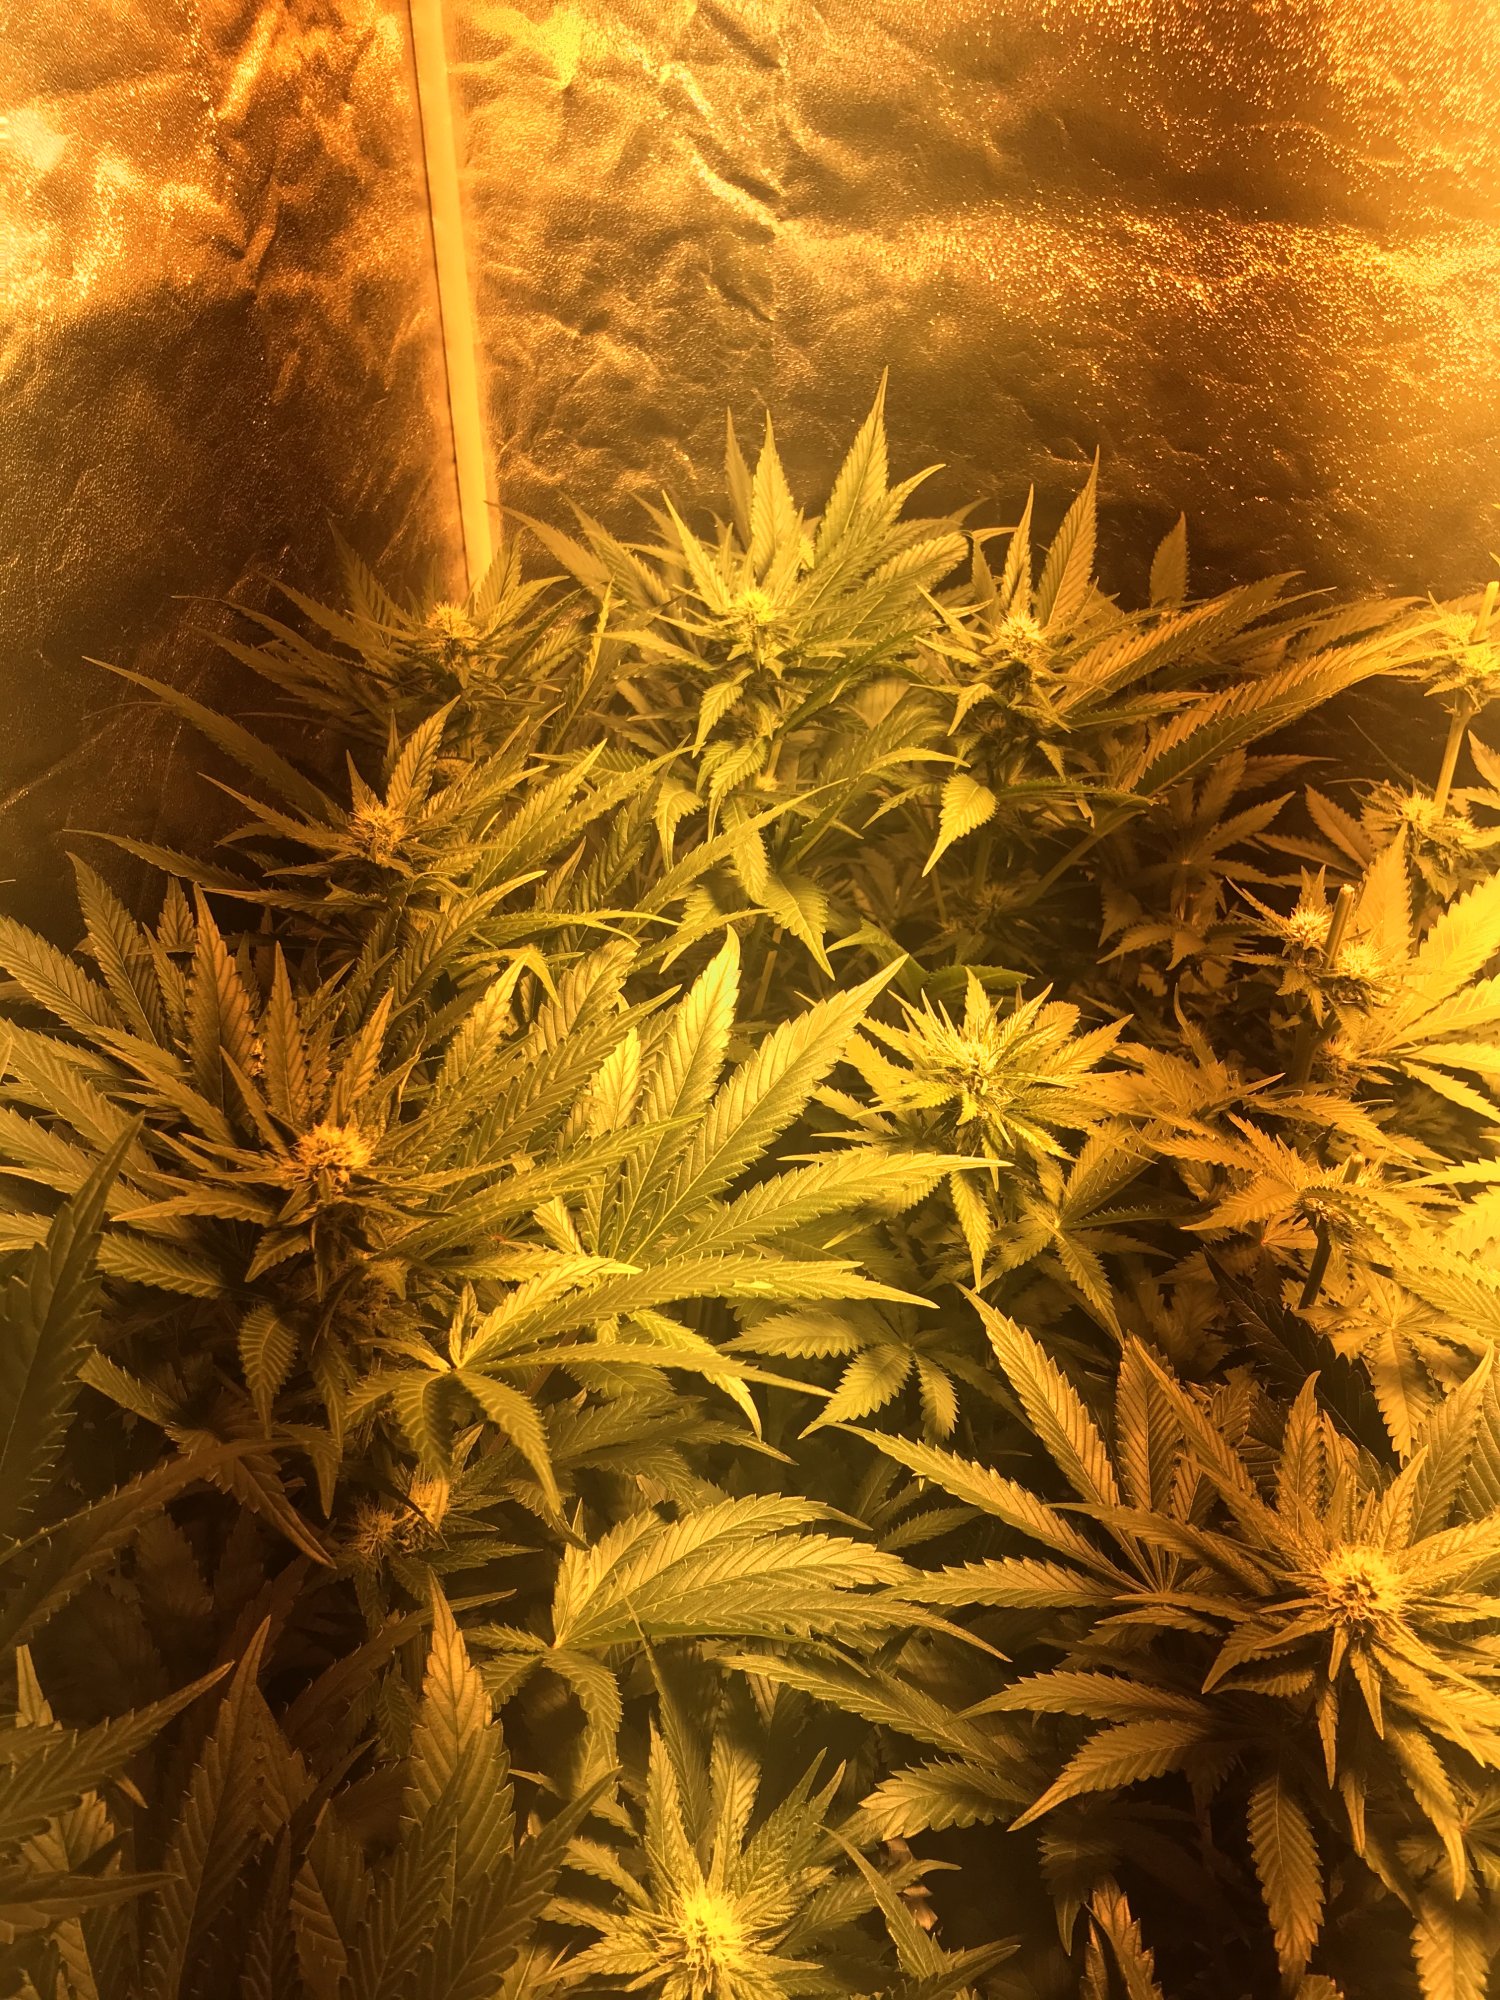 Please have a look at my plants 3 weeks into flower today 14